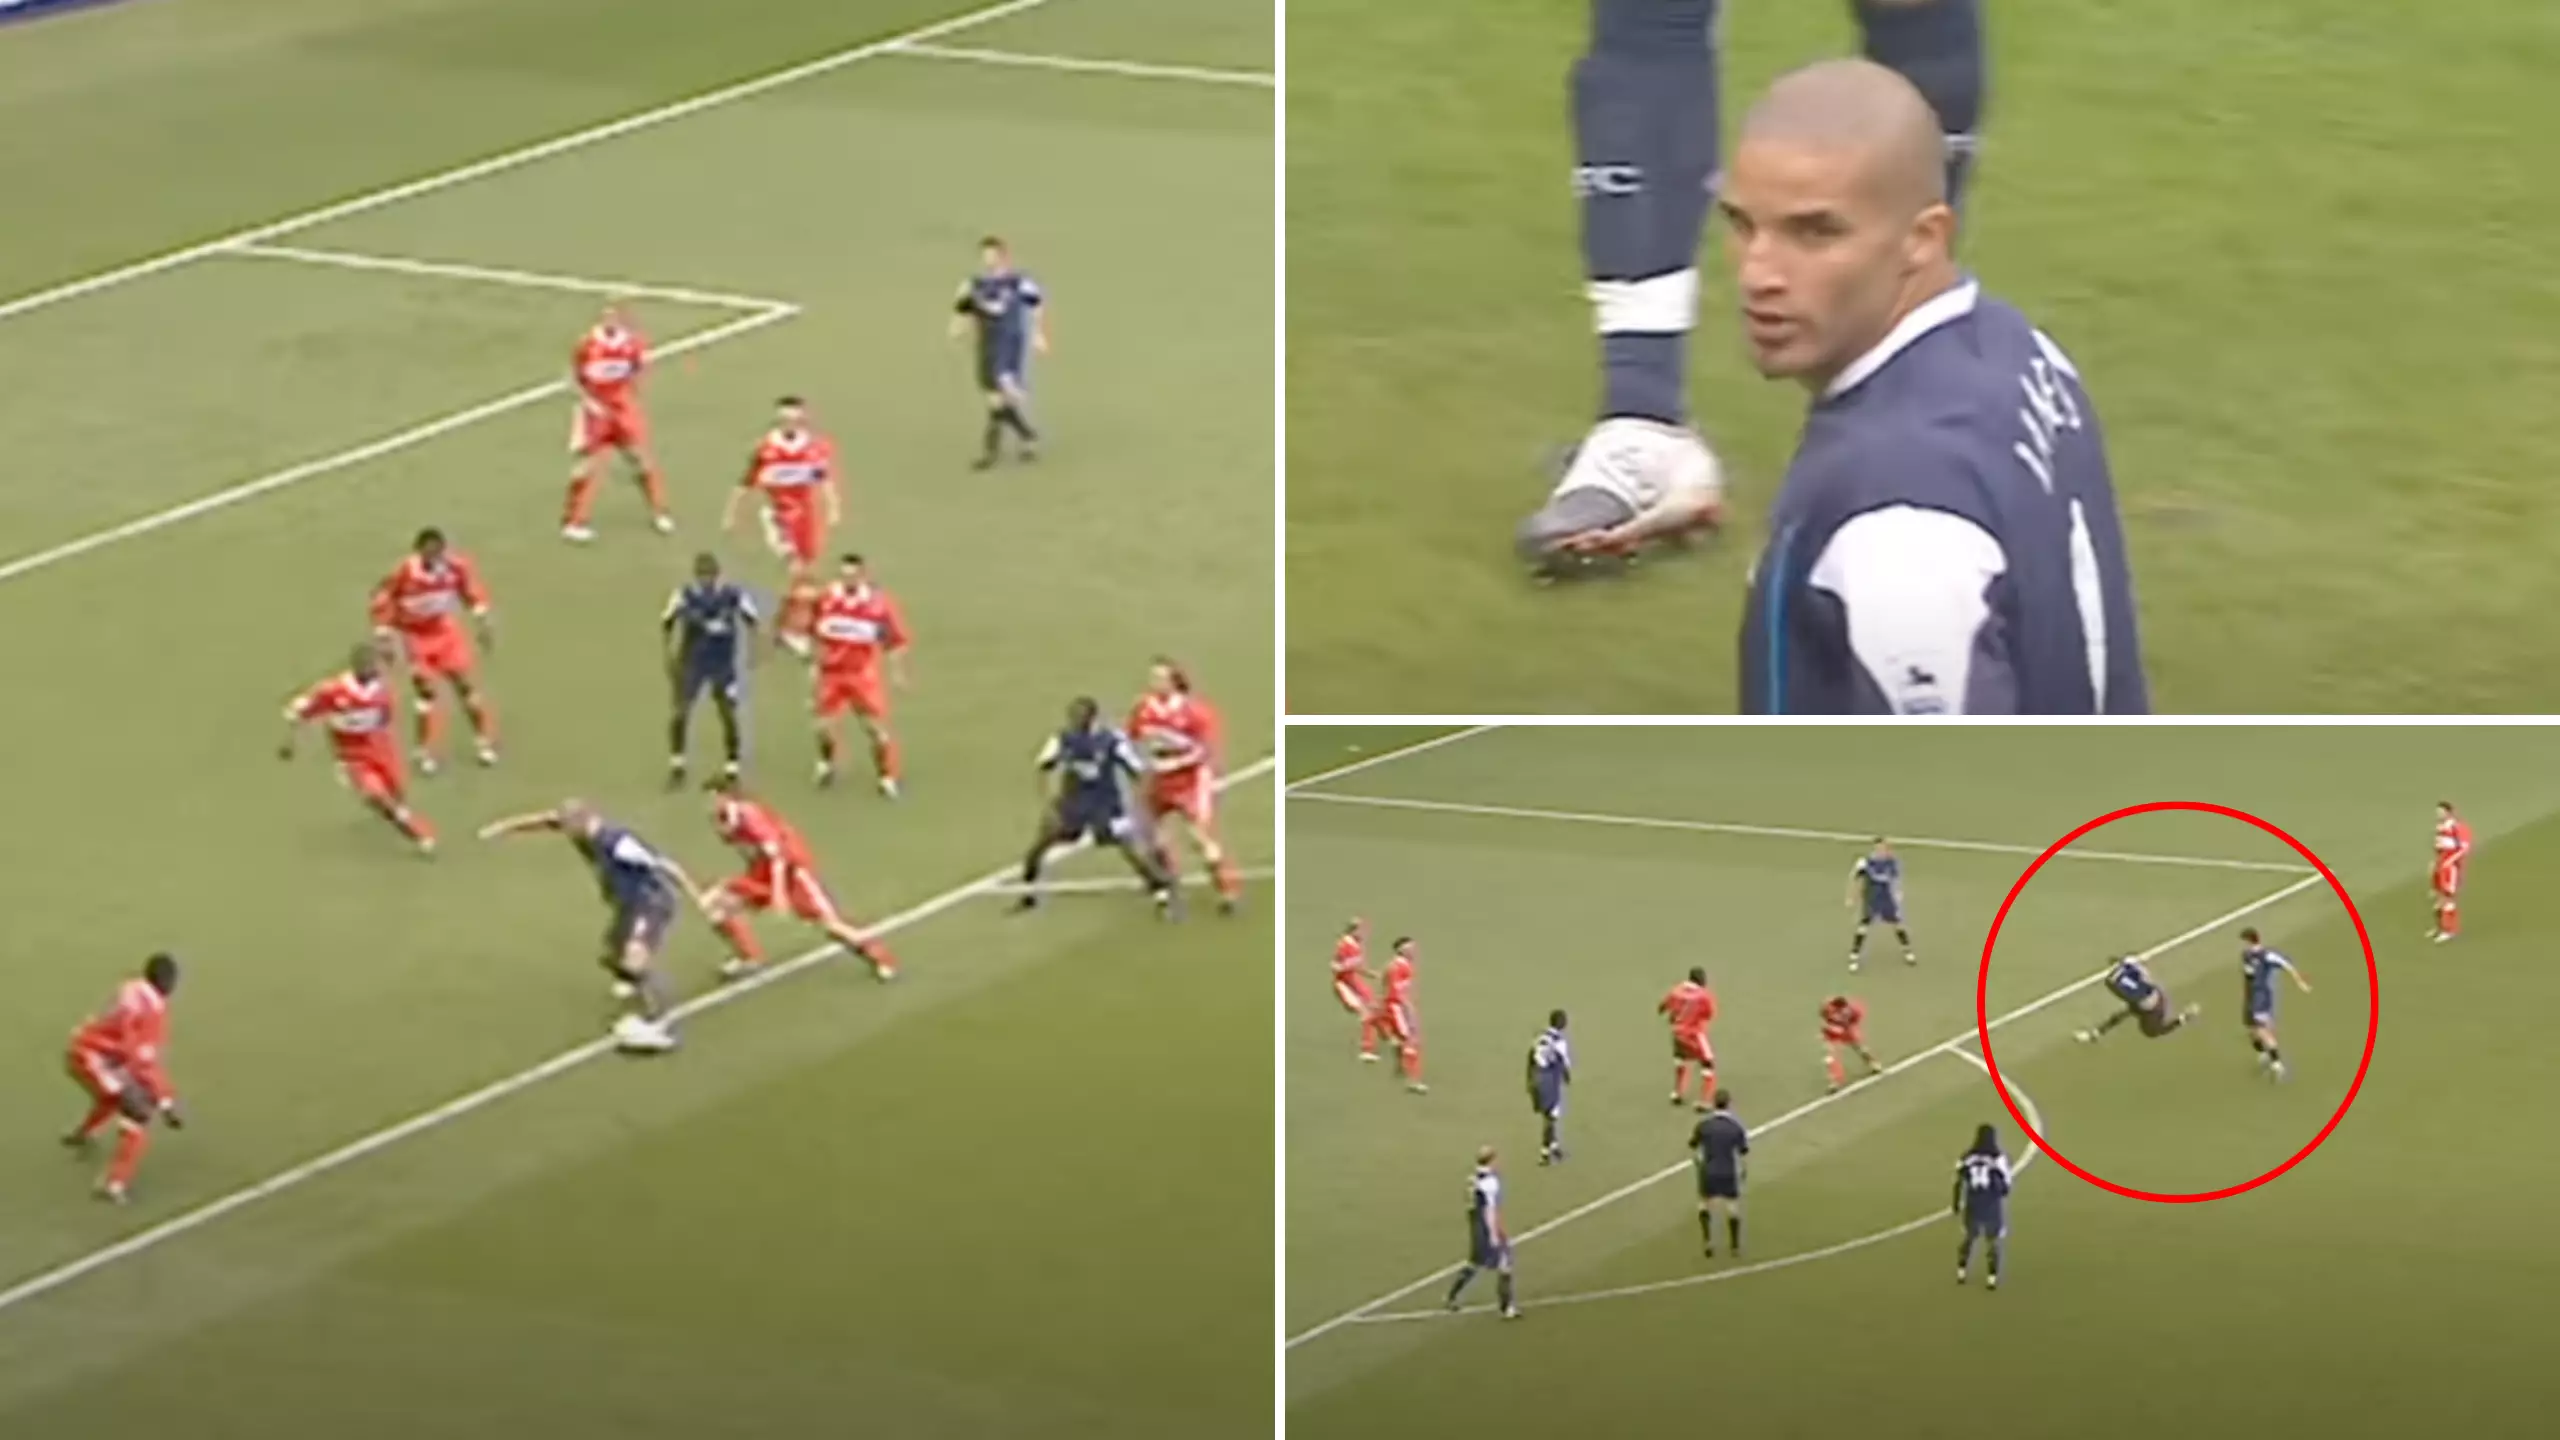 16 Years Ago Today, David James Played As A Striker For Man City - The Highlights Are Outrageous